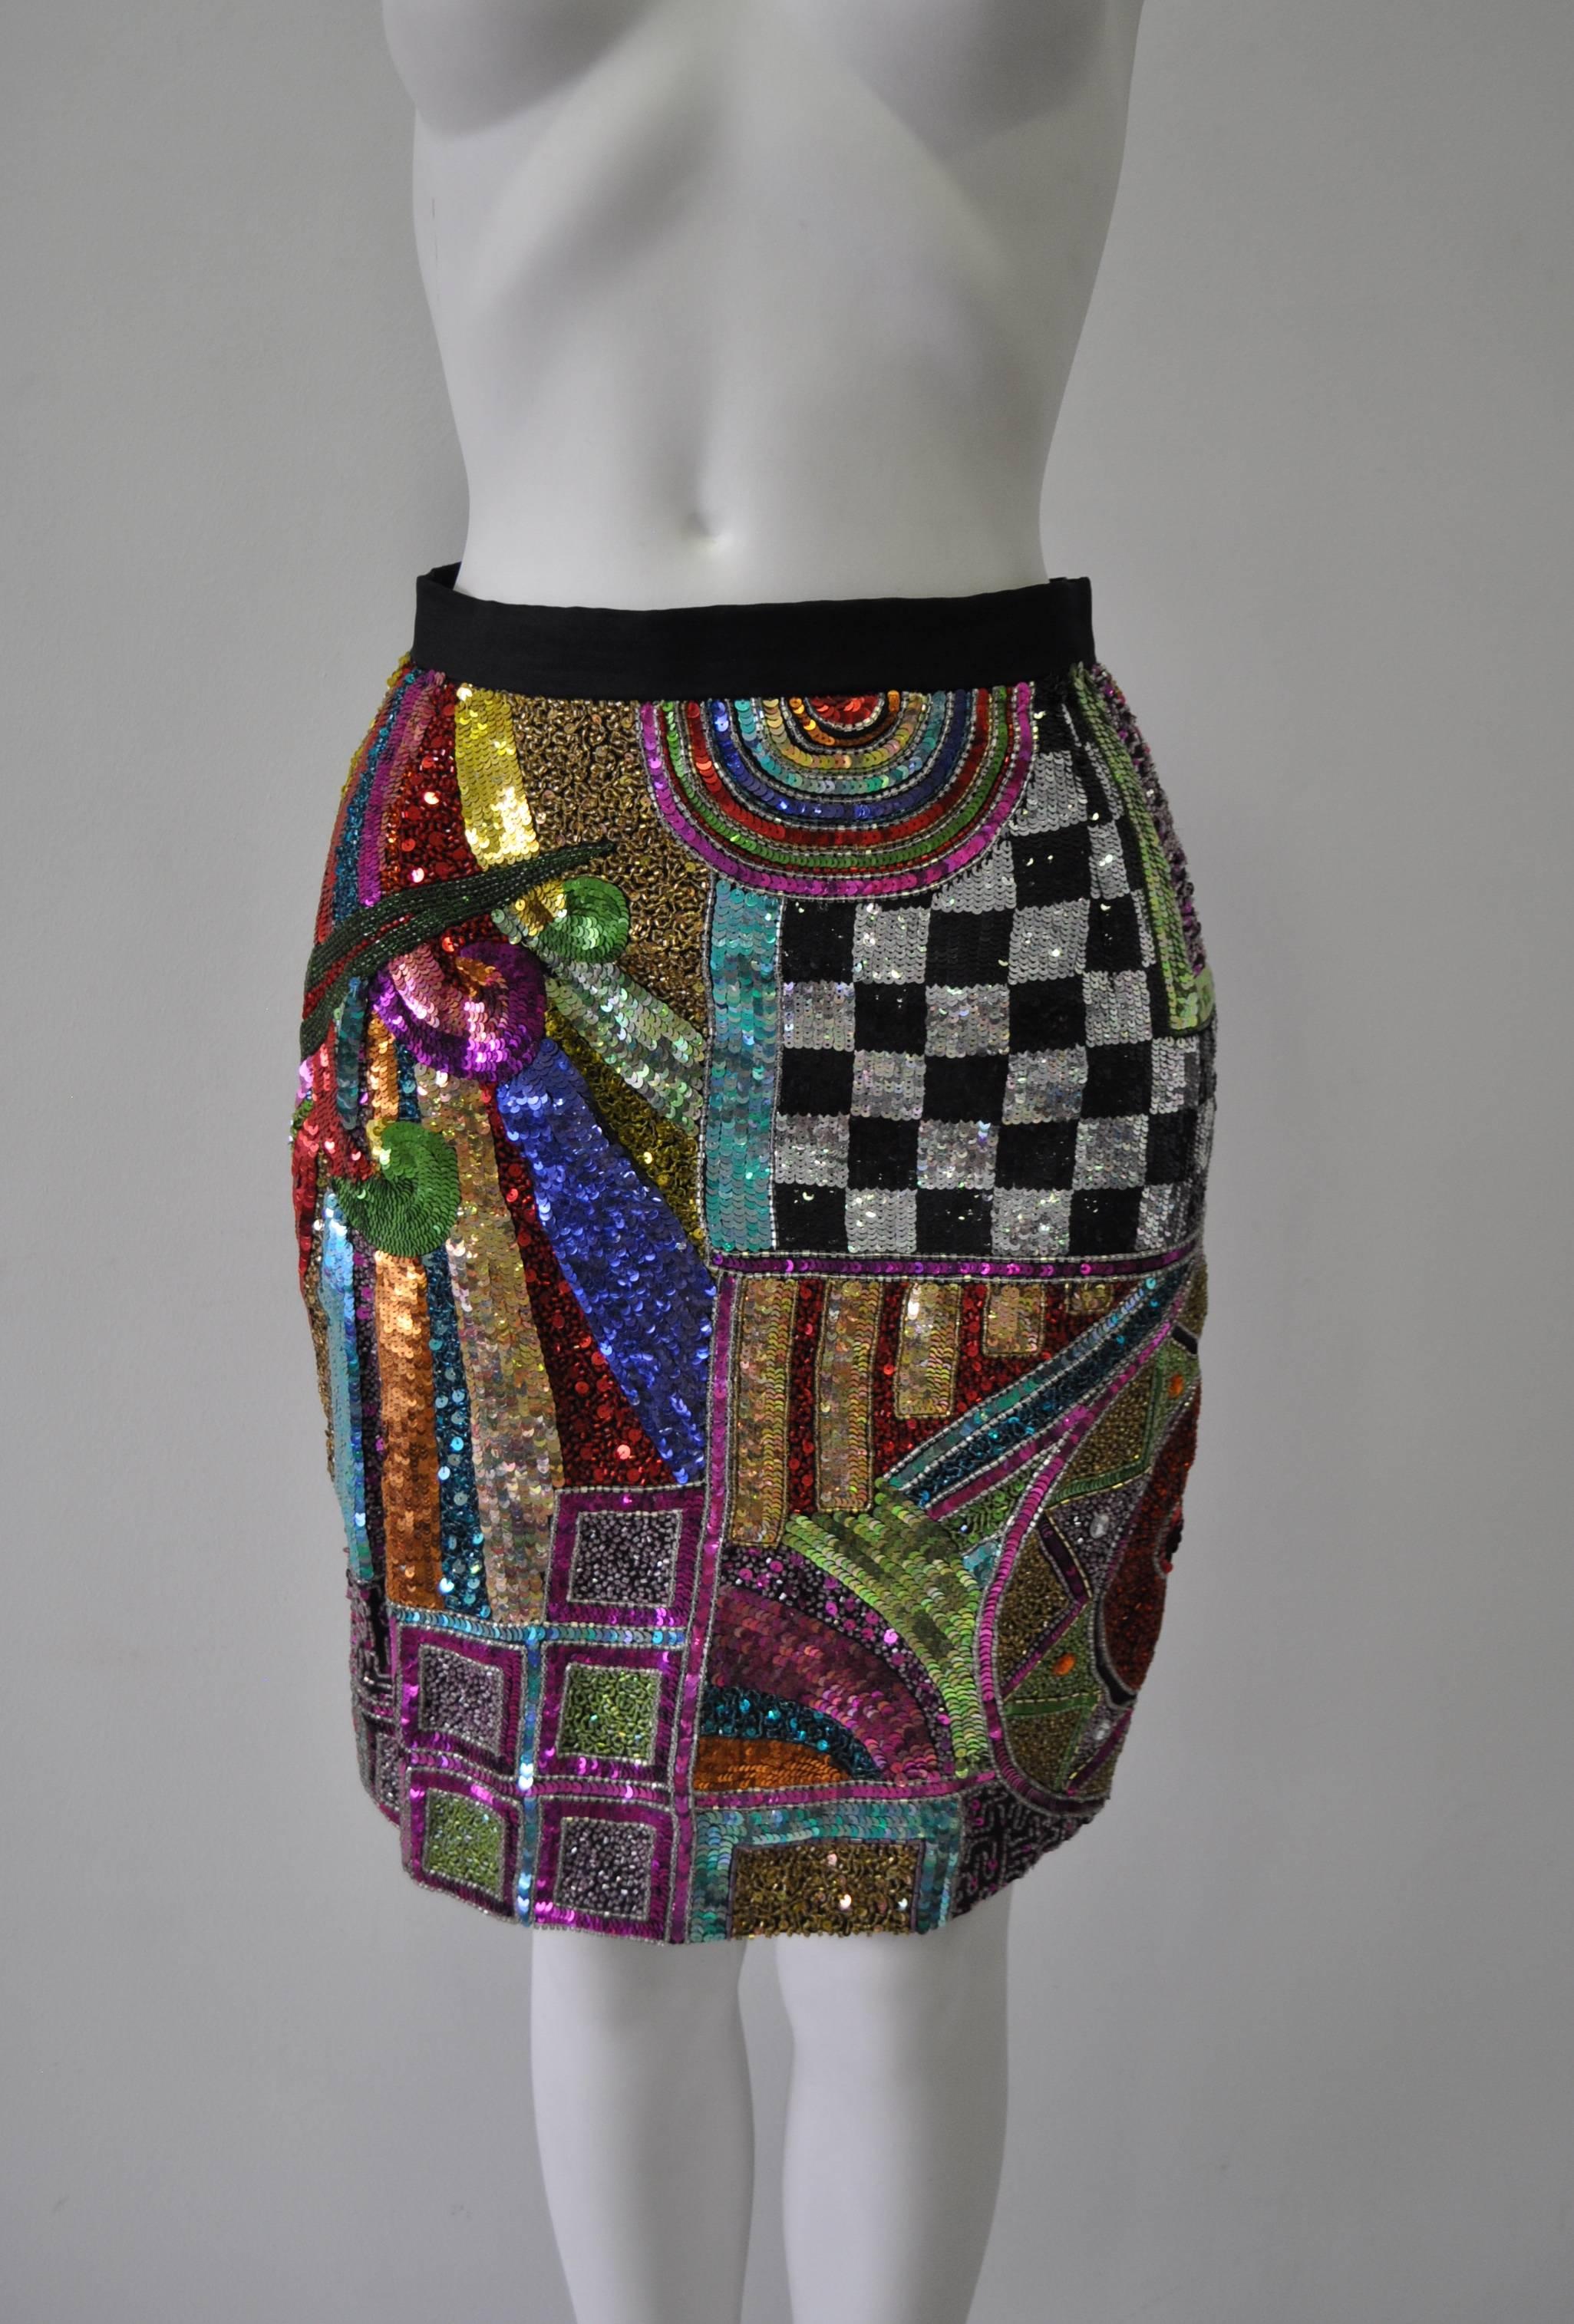 Black Amazing Ella Singh Colorful Sequined Silk Skirt For Sale